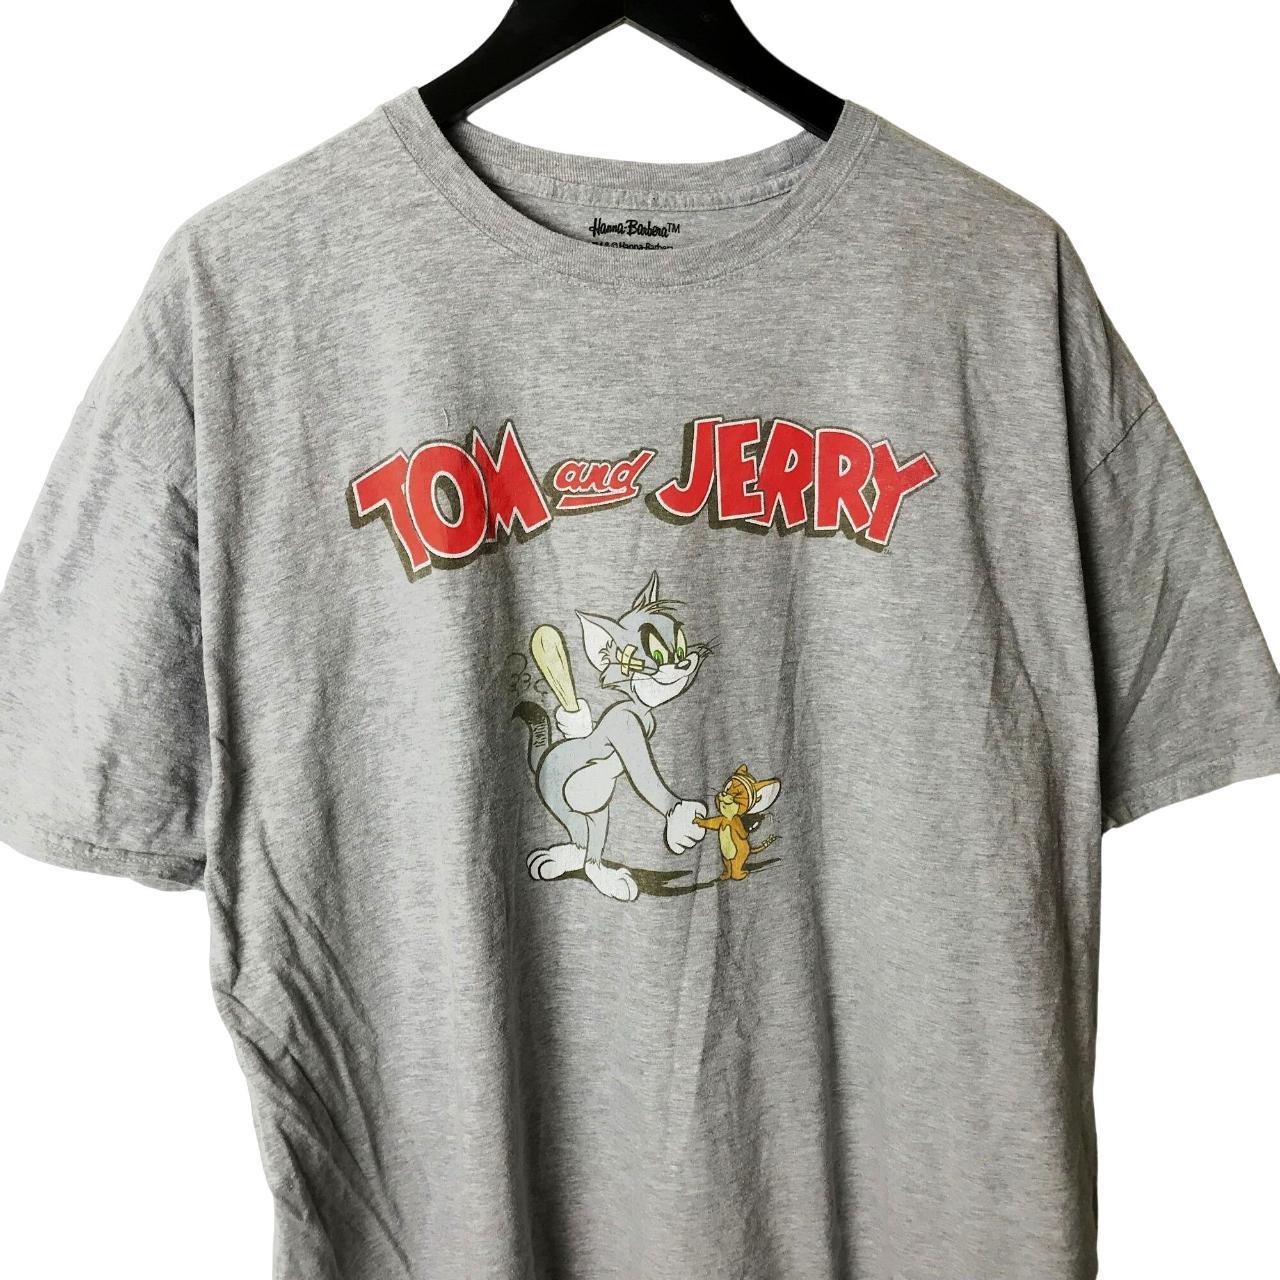 Characters Depop Graphic T Tom Jerry - And Tee... Shirt Cartoon